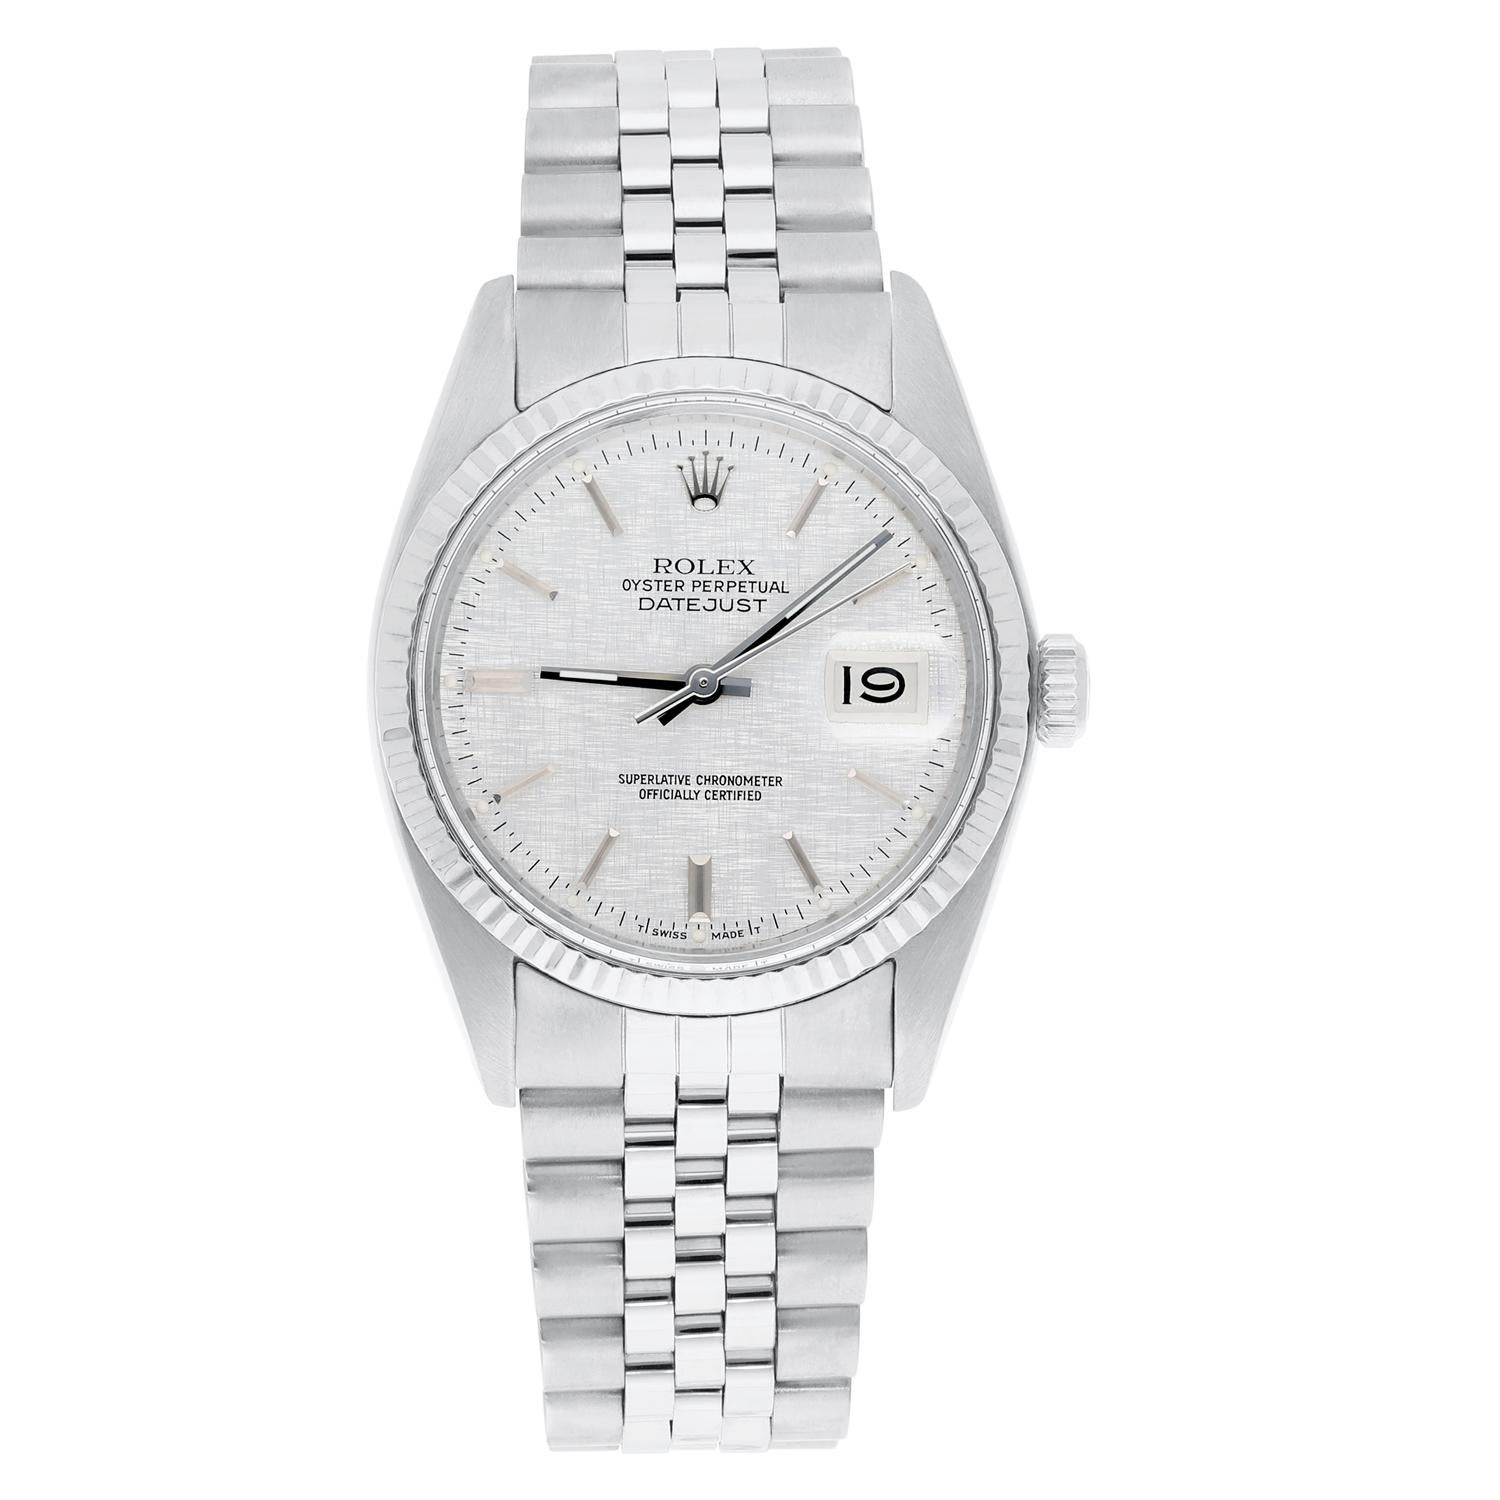 This watch has been professionally polished, serviced and is in excellent overall condition. There are absolutely no visible scratches or blemishes. Model features quick-set movement. Bracelet original Rolex. Authenticity guaranteed! The sale comes